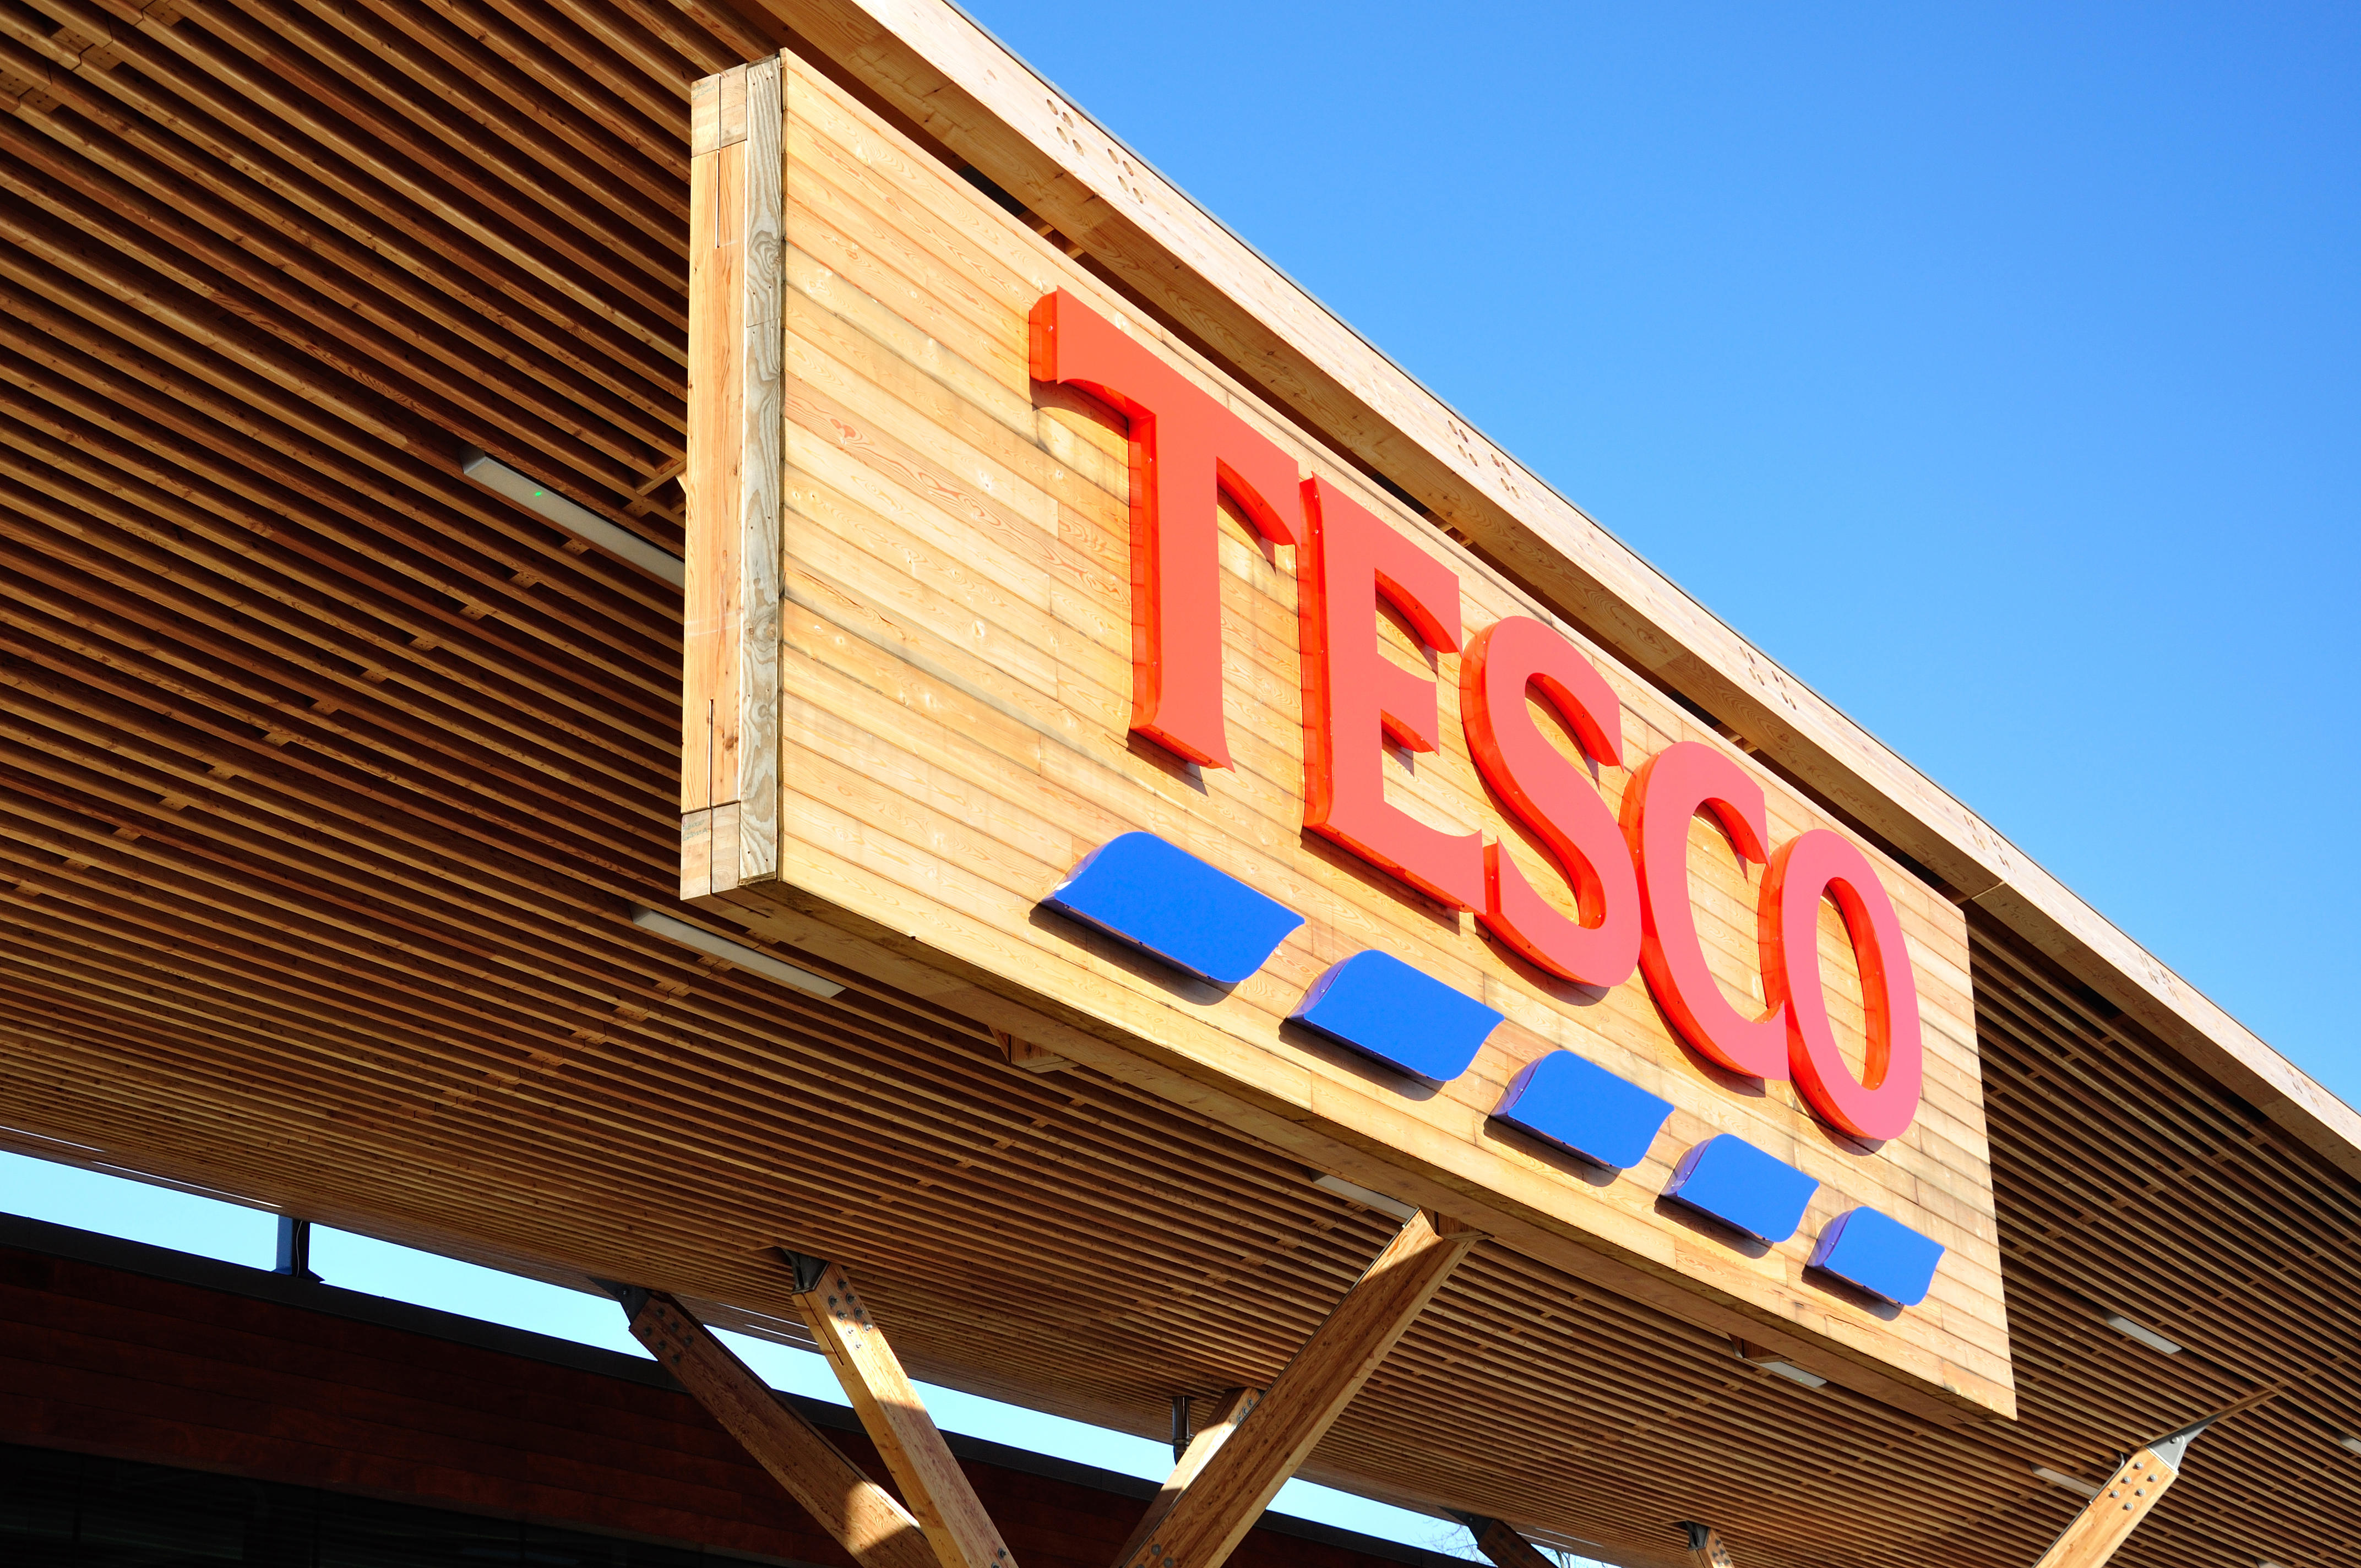 Tesco Will No Longer Stock Popular Pet Foods Including Whiskas, Pedigree And Dreamies